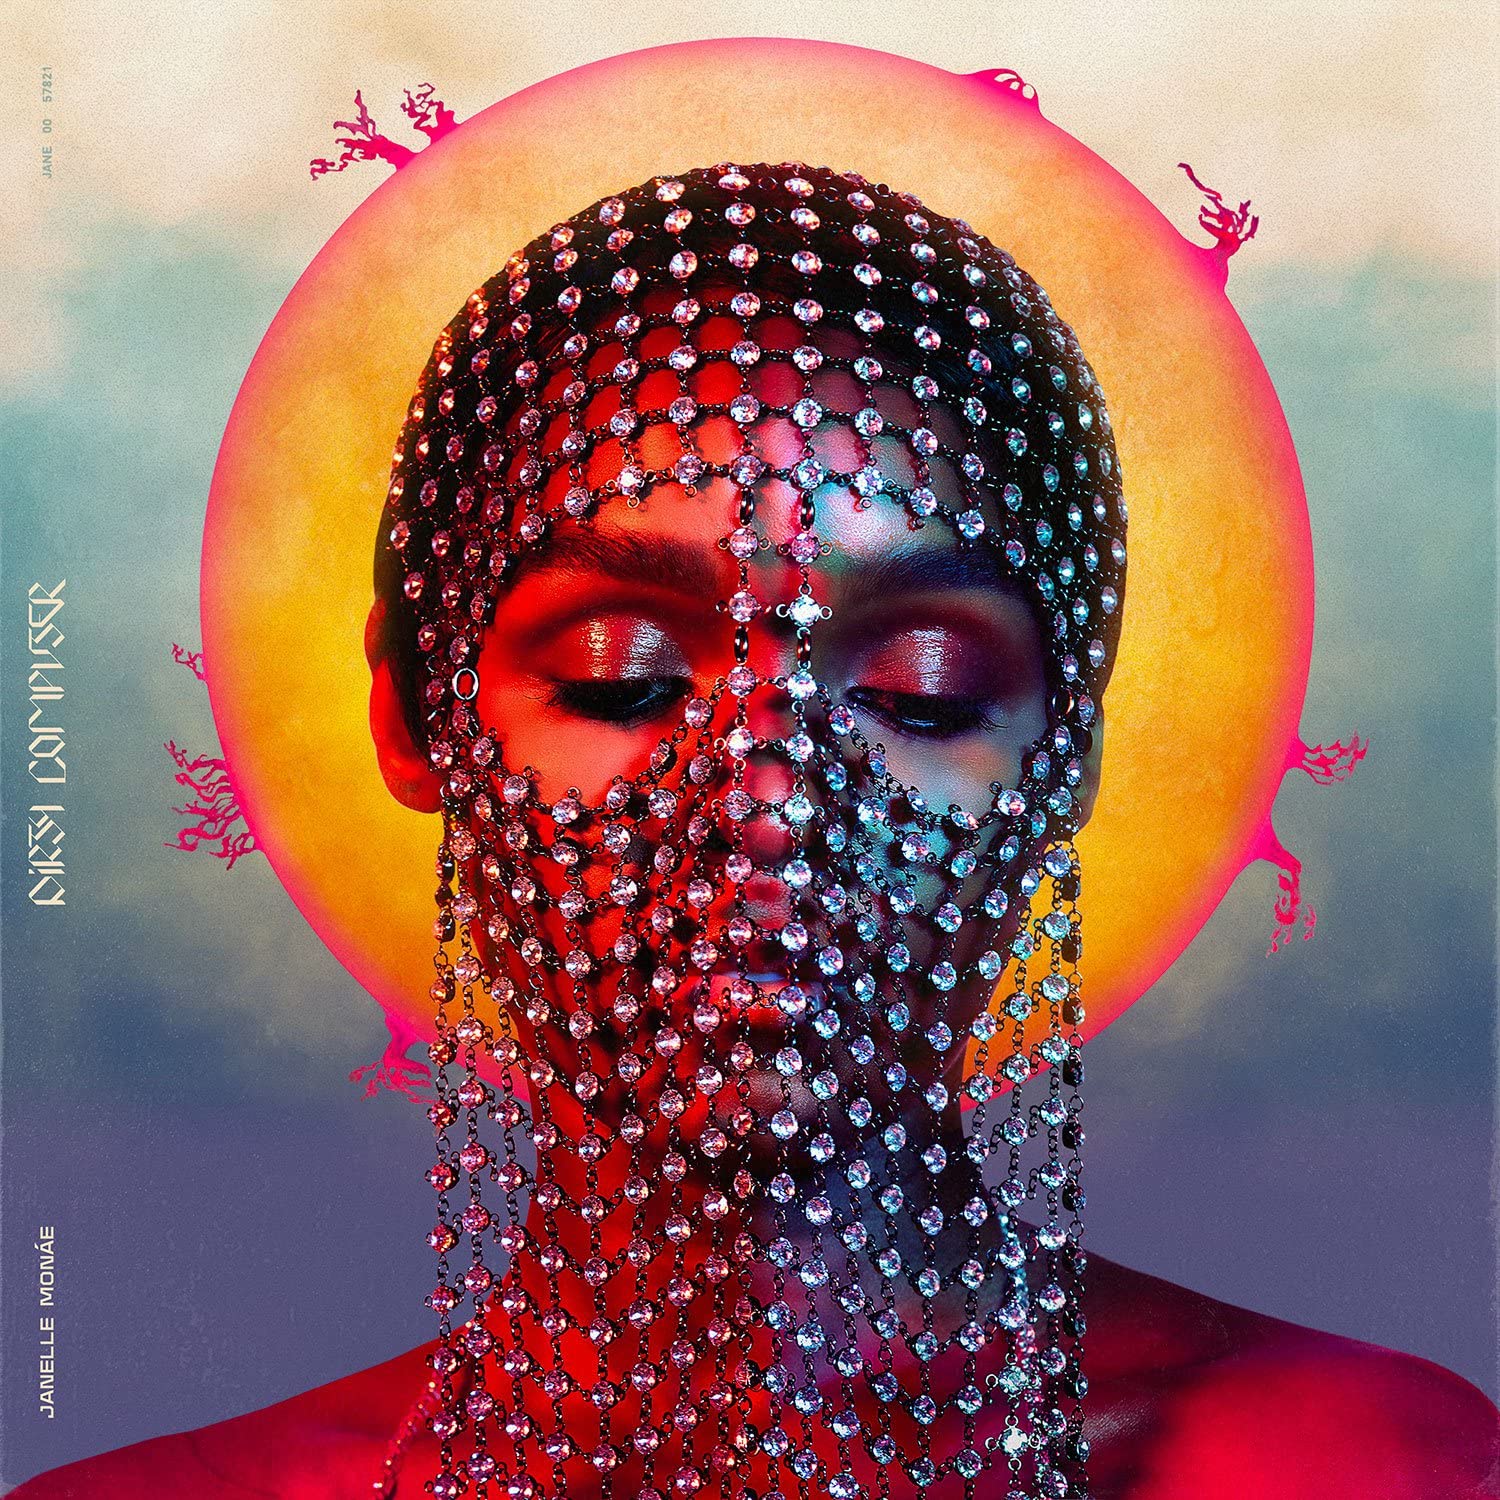 Janelle Monáe Dirty Computer cover artwork